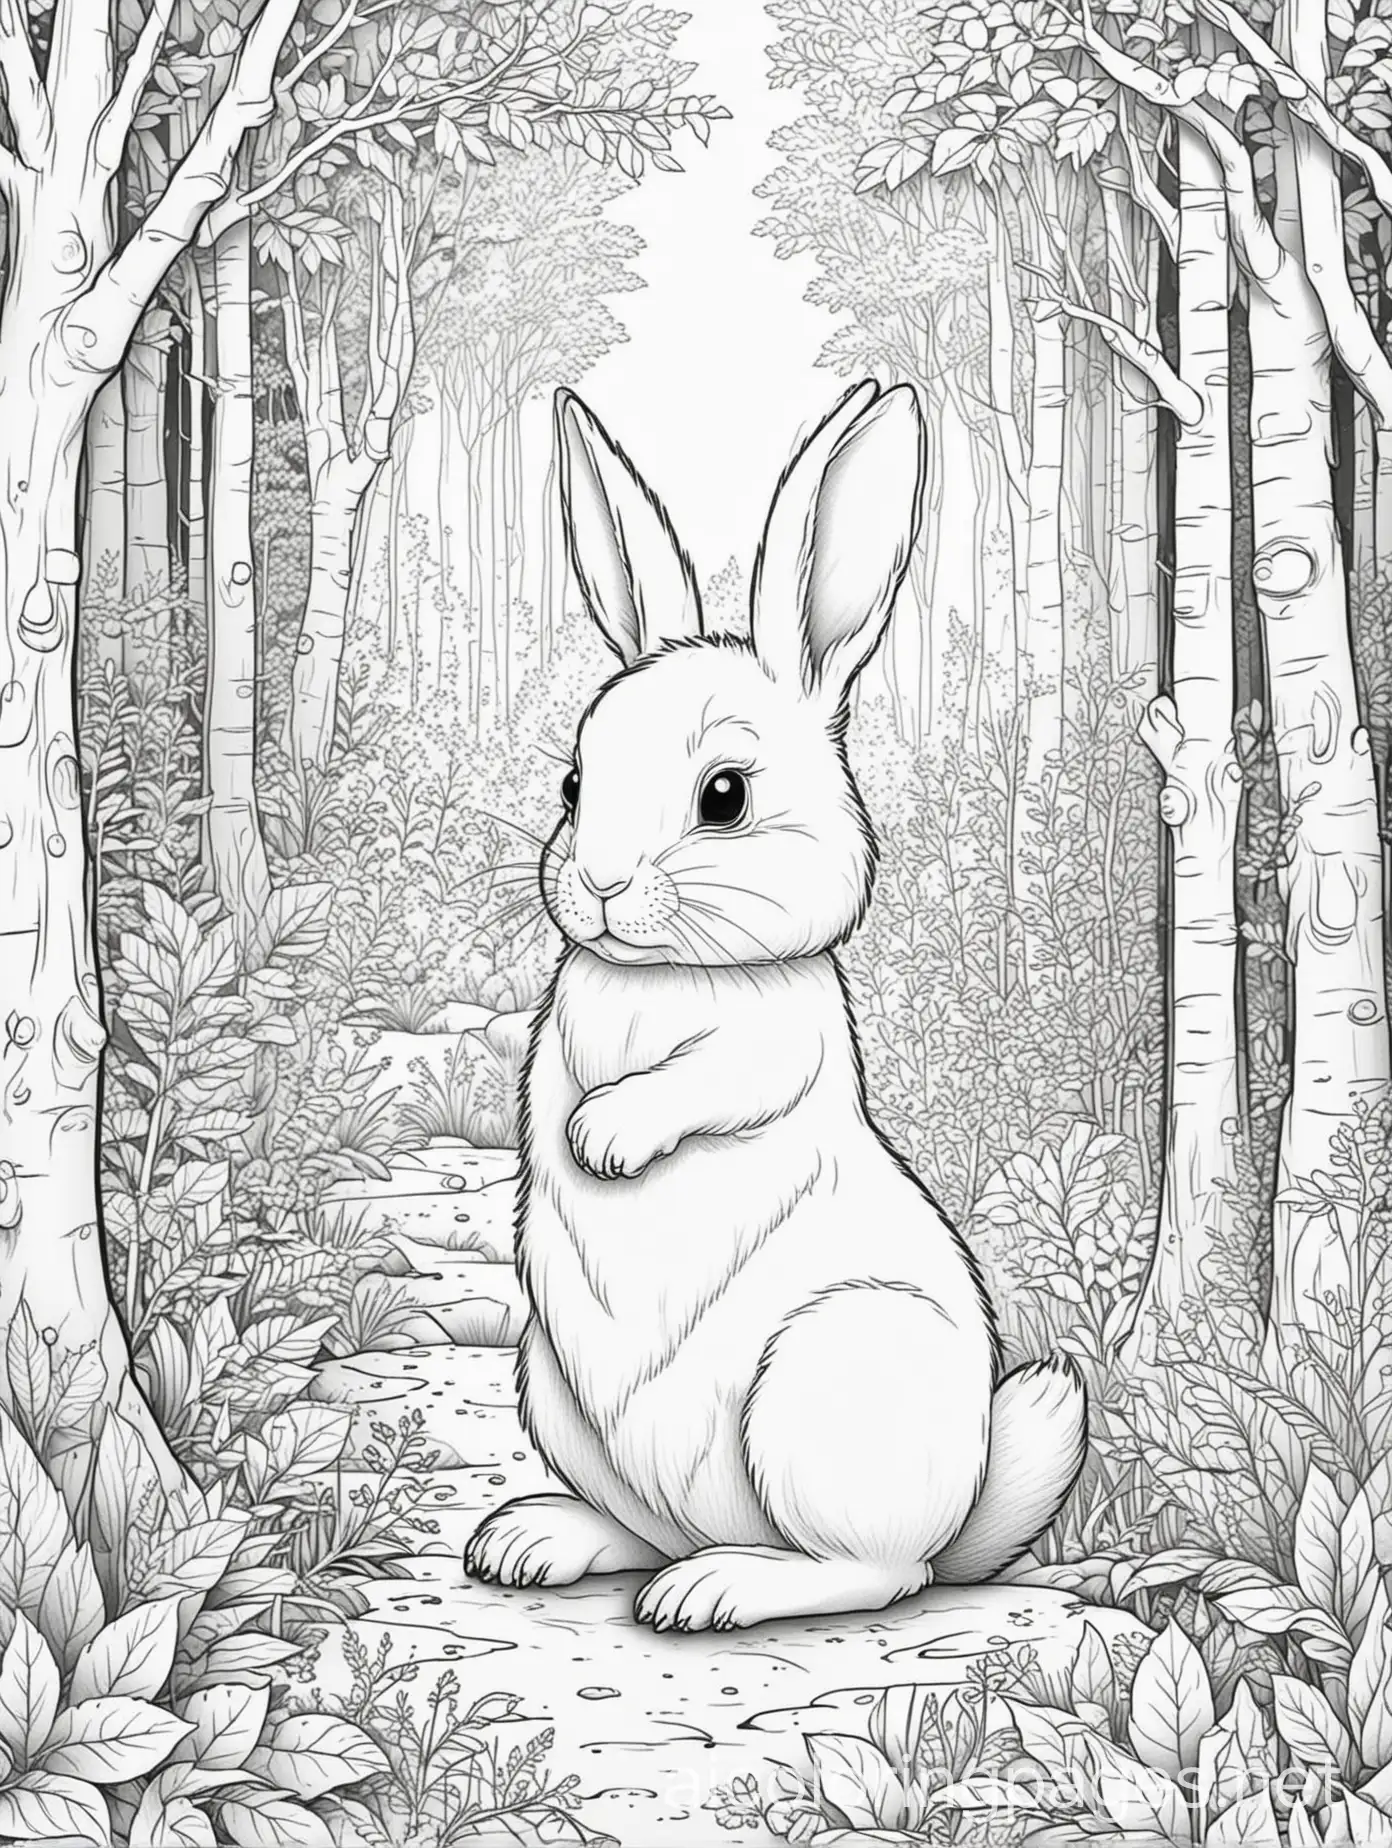 A rabbit in the forest, Coloring Page, black and white, line art, white background, Simplicity, Ample White Space. The background of the coloring page is plain white to make it easy for young children to color within the lines. The outlines of all the subjects are easy to distinguish, making it simple for kids to color without too much difficulty